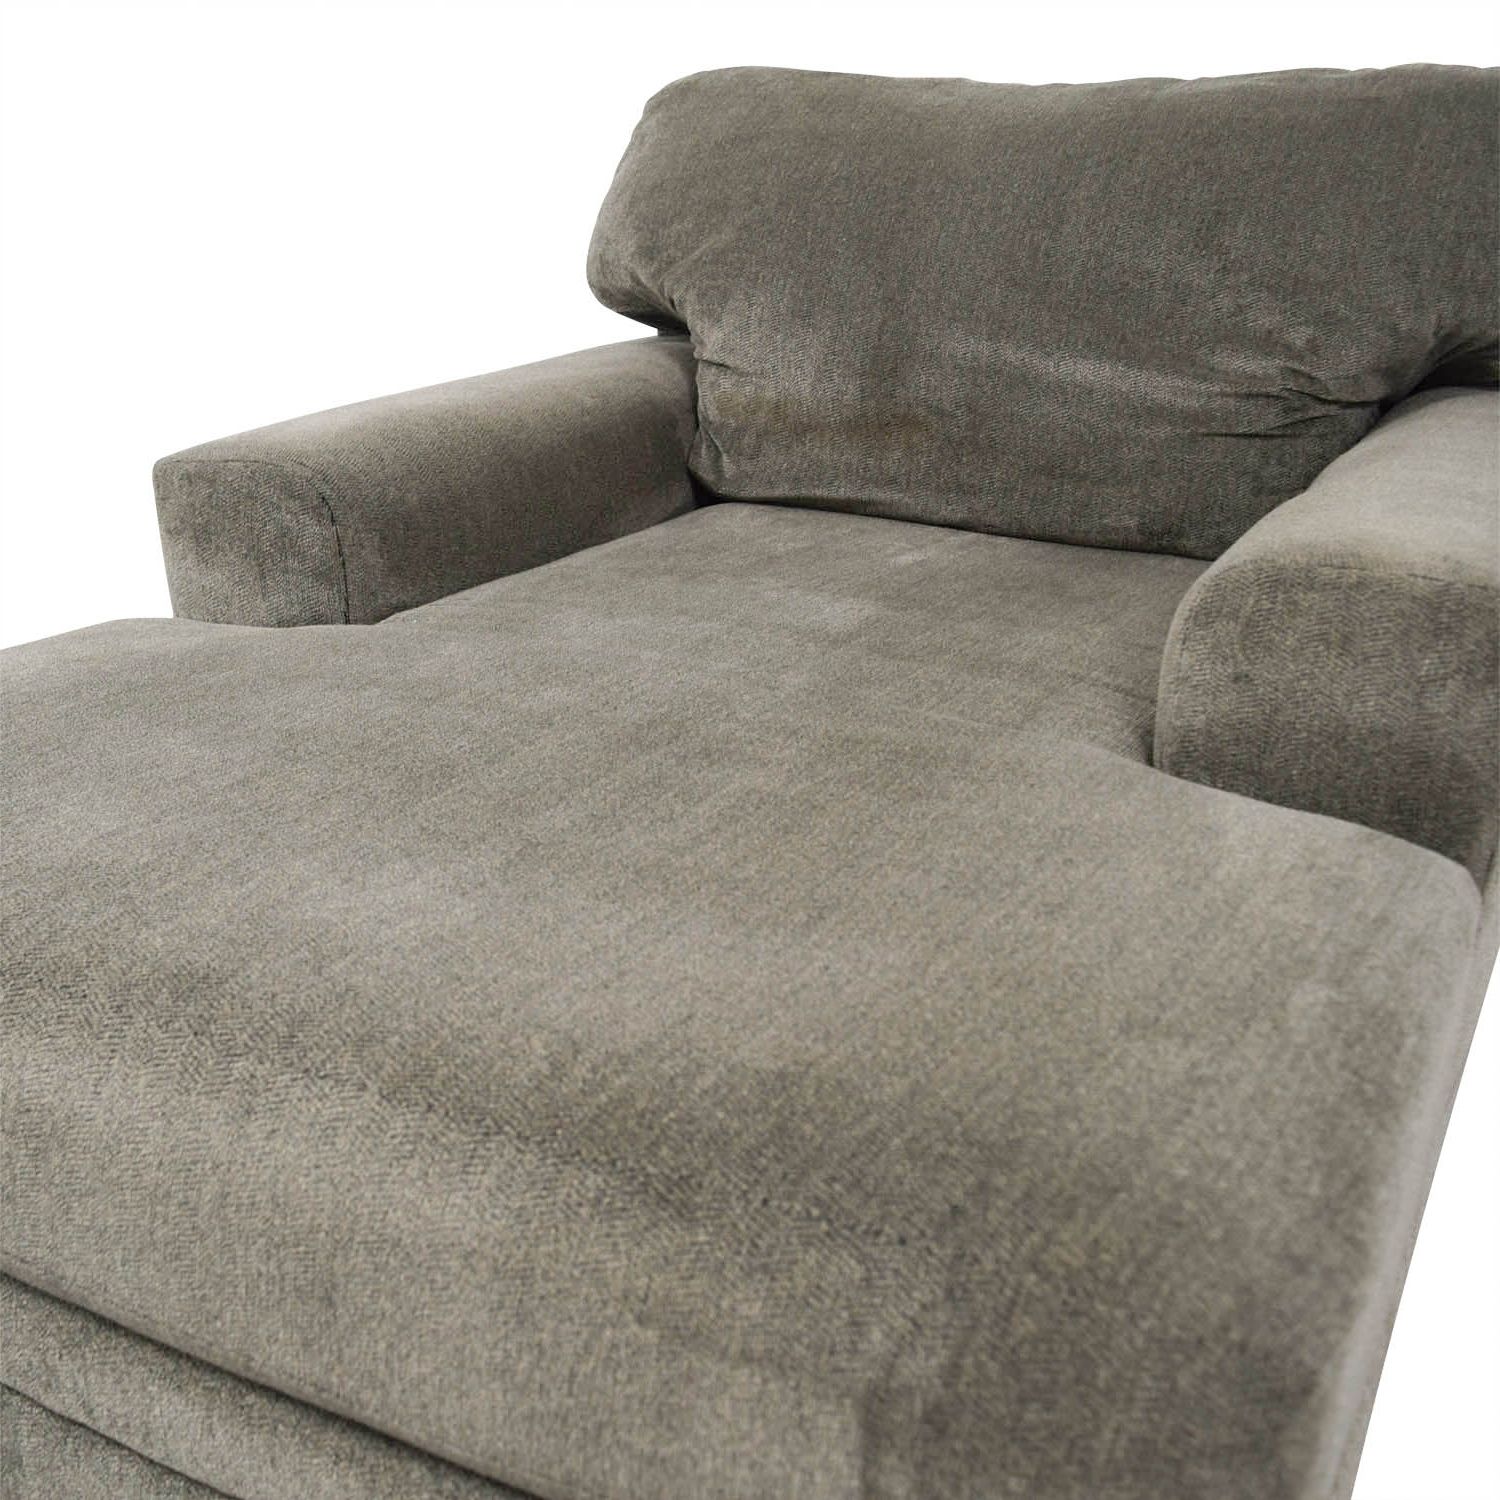 [%81% Off – Bob's Furniture Bob's Furniture Grey Chaise Lounge / Sofas Within Current Grey Chaises|Grey Chaises Throughout Most Recent 81% Off – Bob's Furniture Bob's Furniture Grey Chaise Lounge / Sofas|Widely Used Grey Chaises For 81% Off – Bob's Furniture Bob's Furniture Grey Chaise Lounge / Sofas|Well Liked 81% Off – Bob's Furniture Bob's Furniture Grey Chaise Lounge / Sofas For Grey Chaises%] (View 14 of 15)